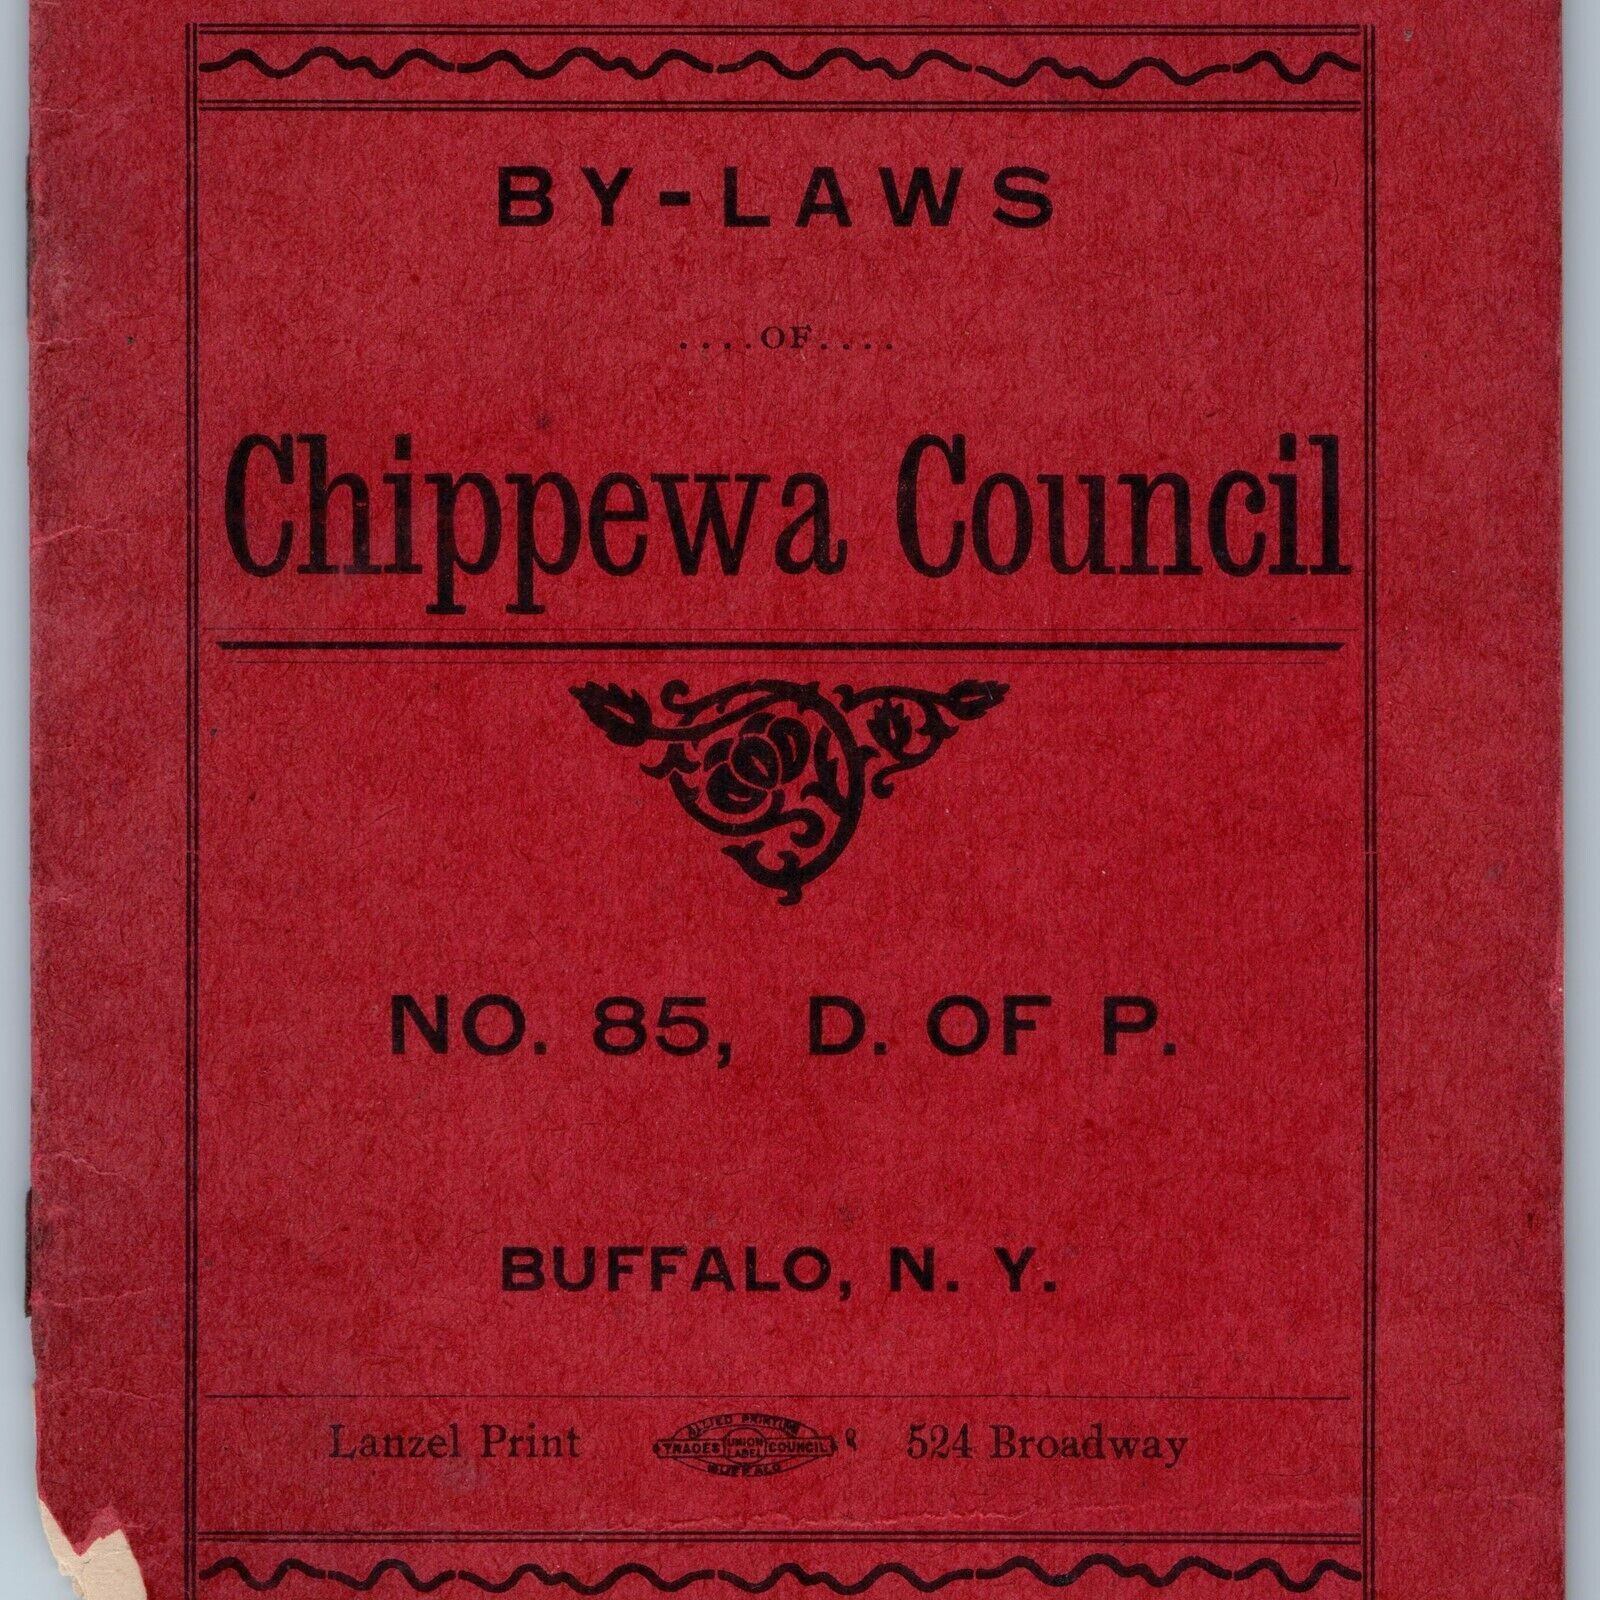 c1900s Buffalo, NY Pocahontas Chippewa Council By-Laws Booklet Indian Tribe C55